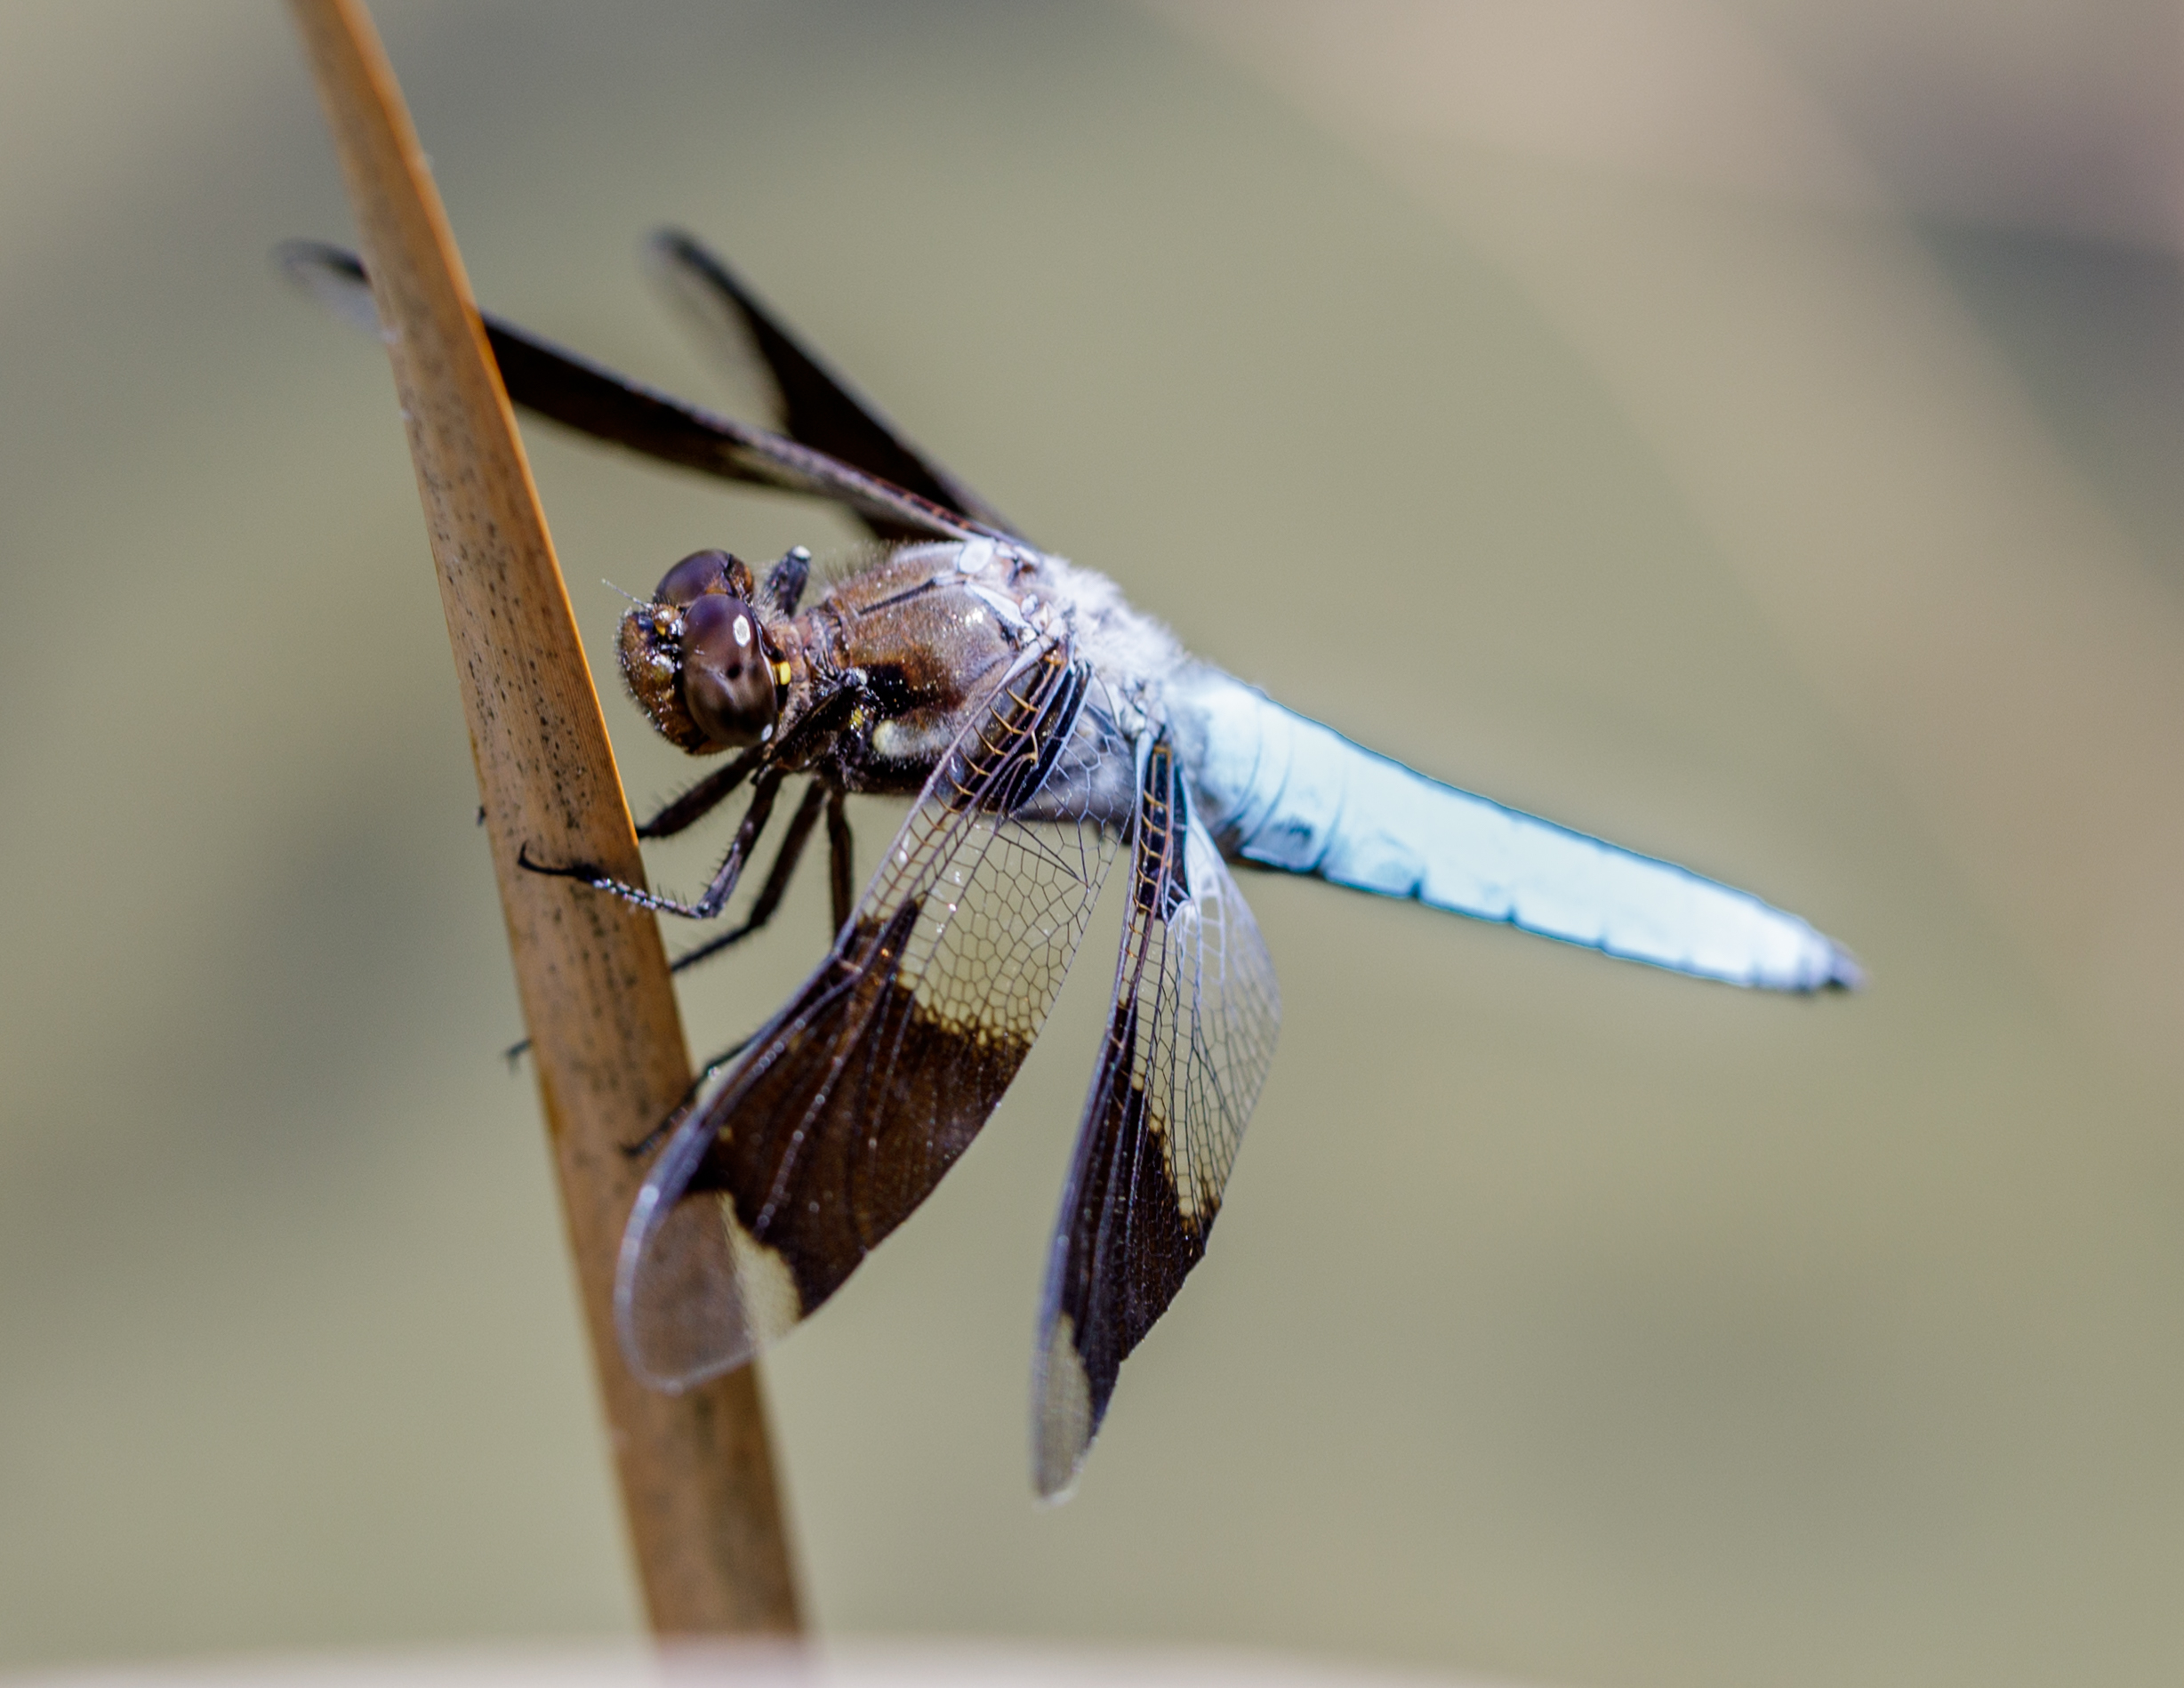 An adult male Widow Skimmer Dragonfly perched on a water grass stem. The dragonfly has a long, slender body with a dark brown and white pattern, and its large, clear wings are visible in the image.